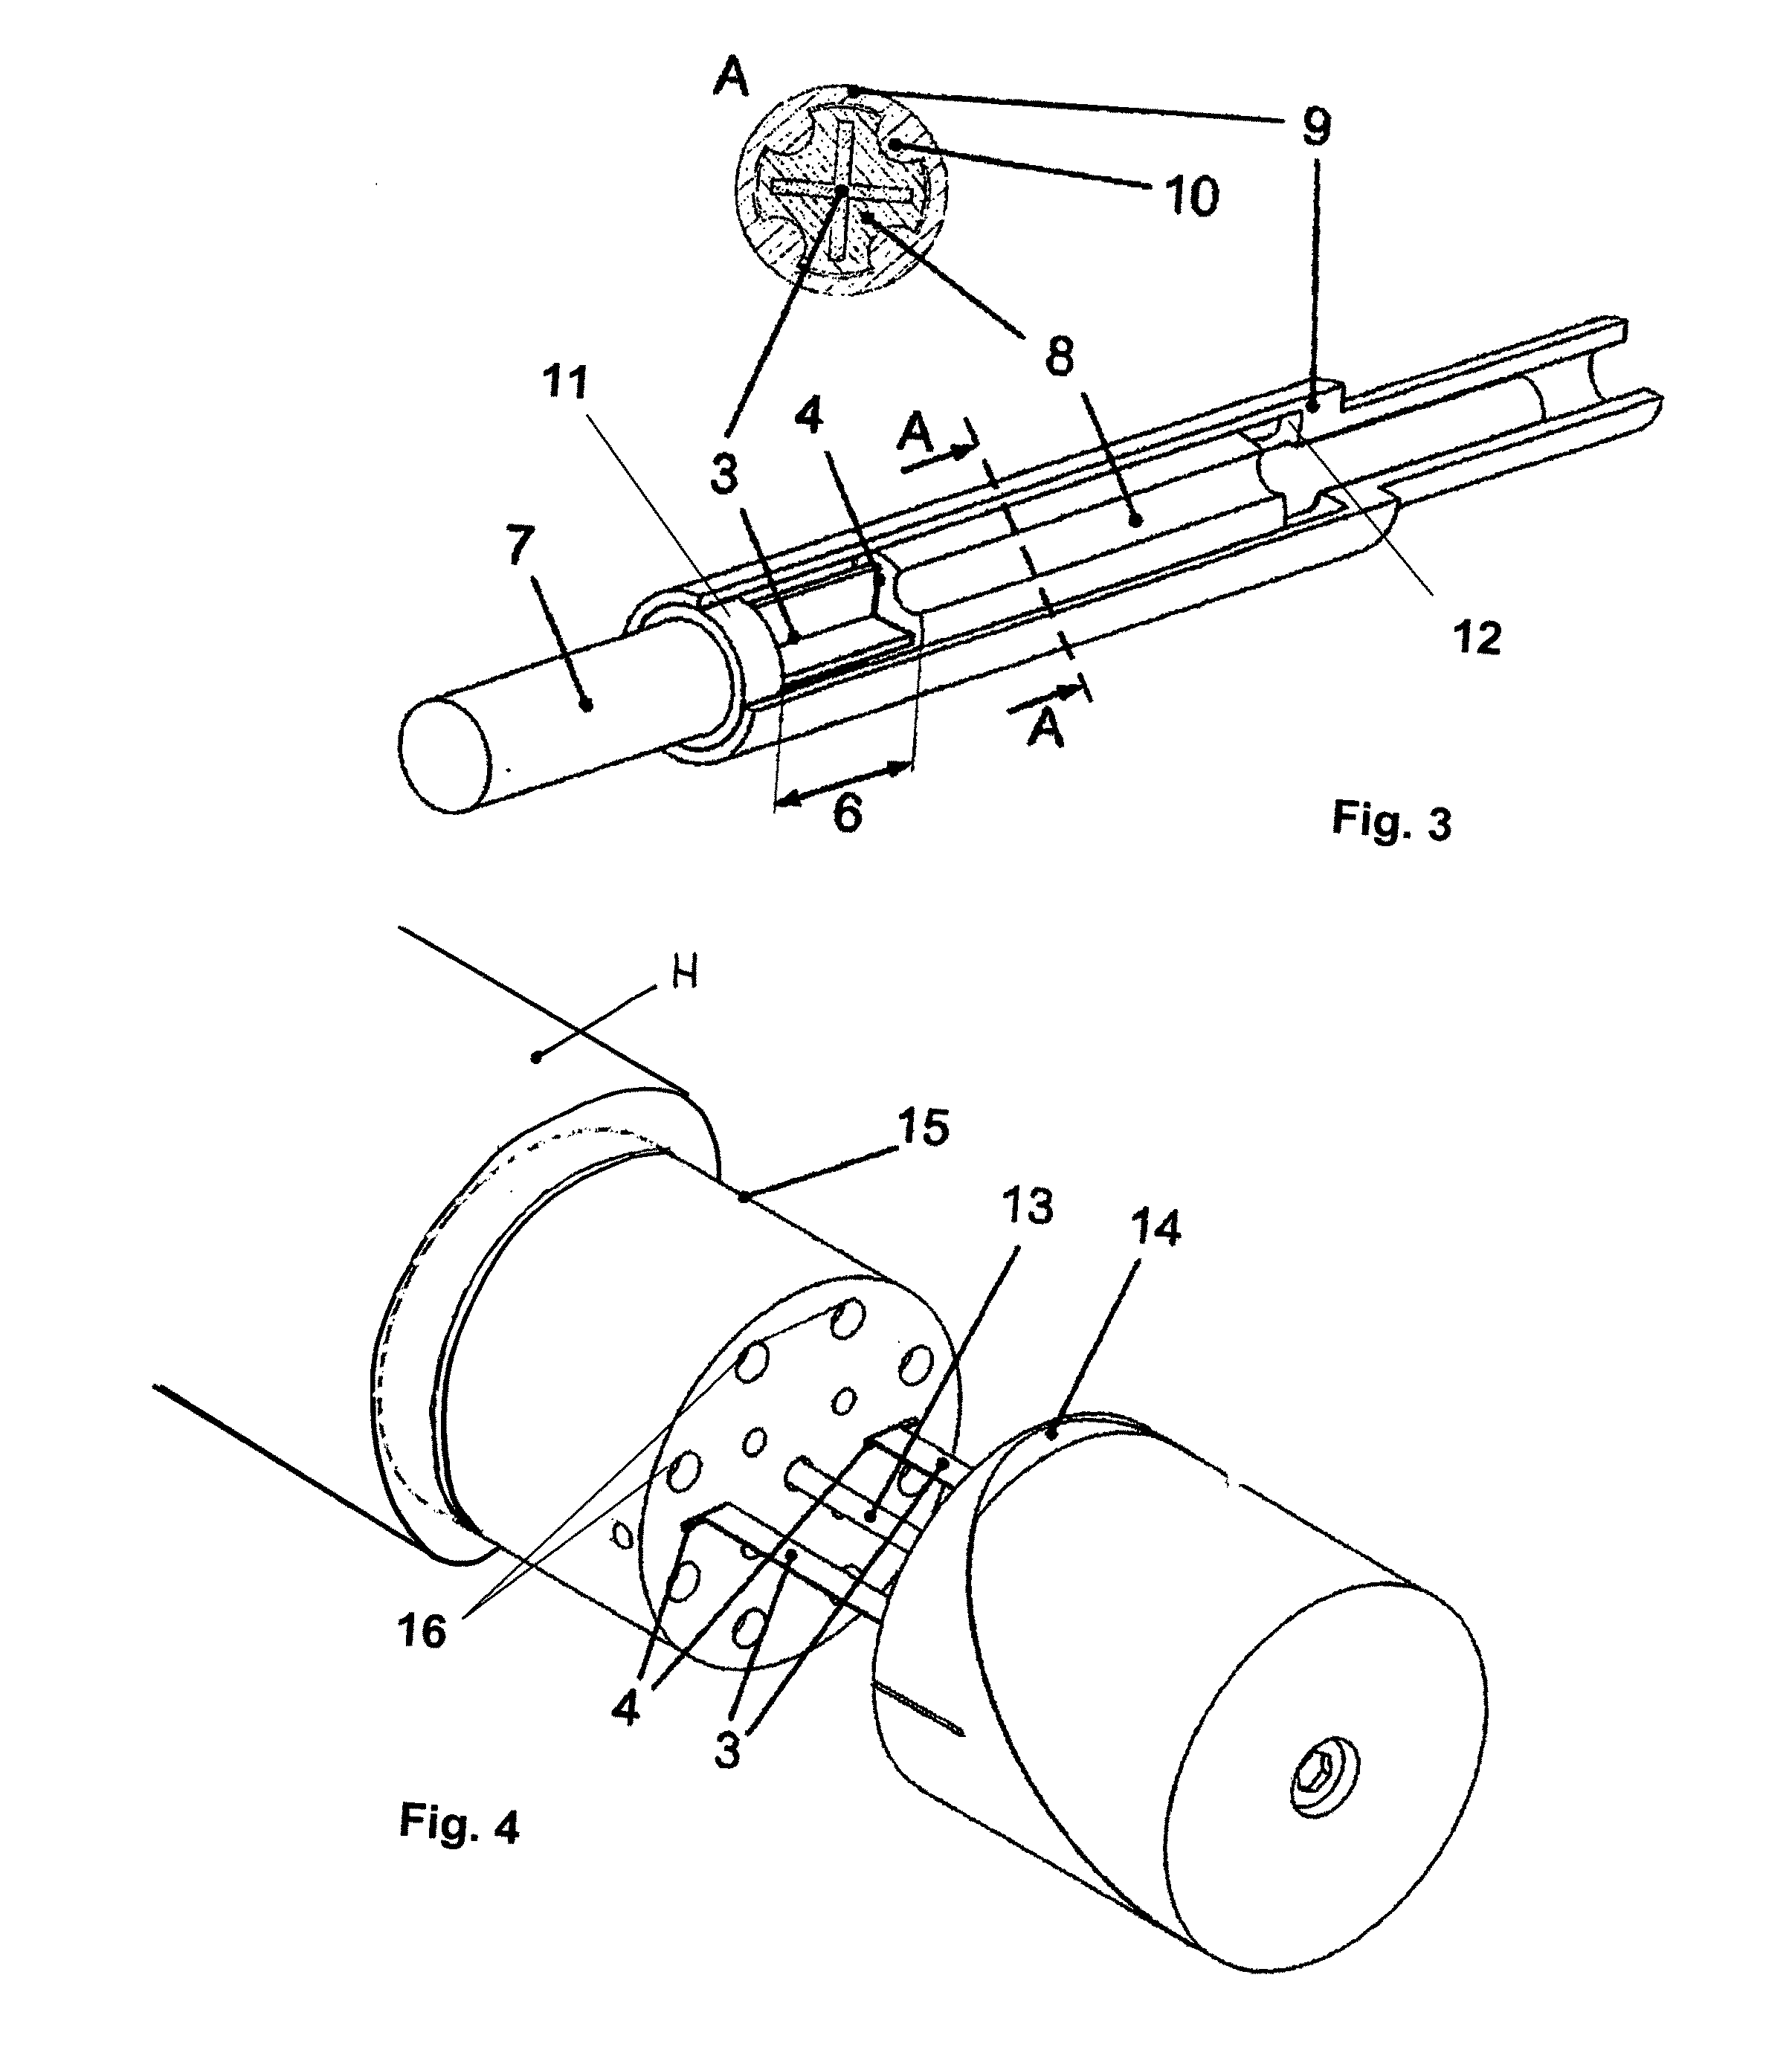 Shaft arrangement and method for relaying torques acting around a rotational axis